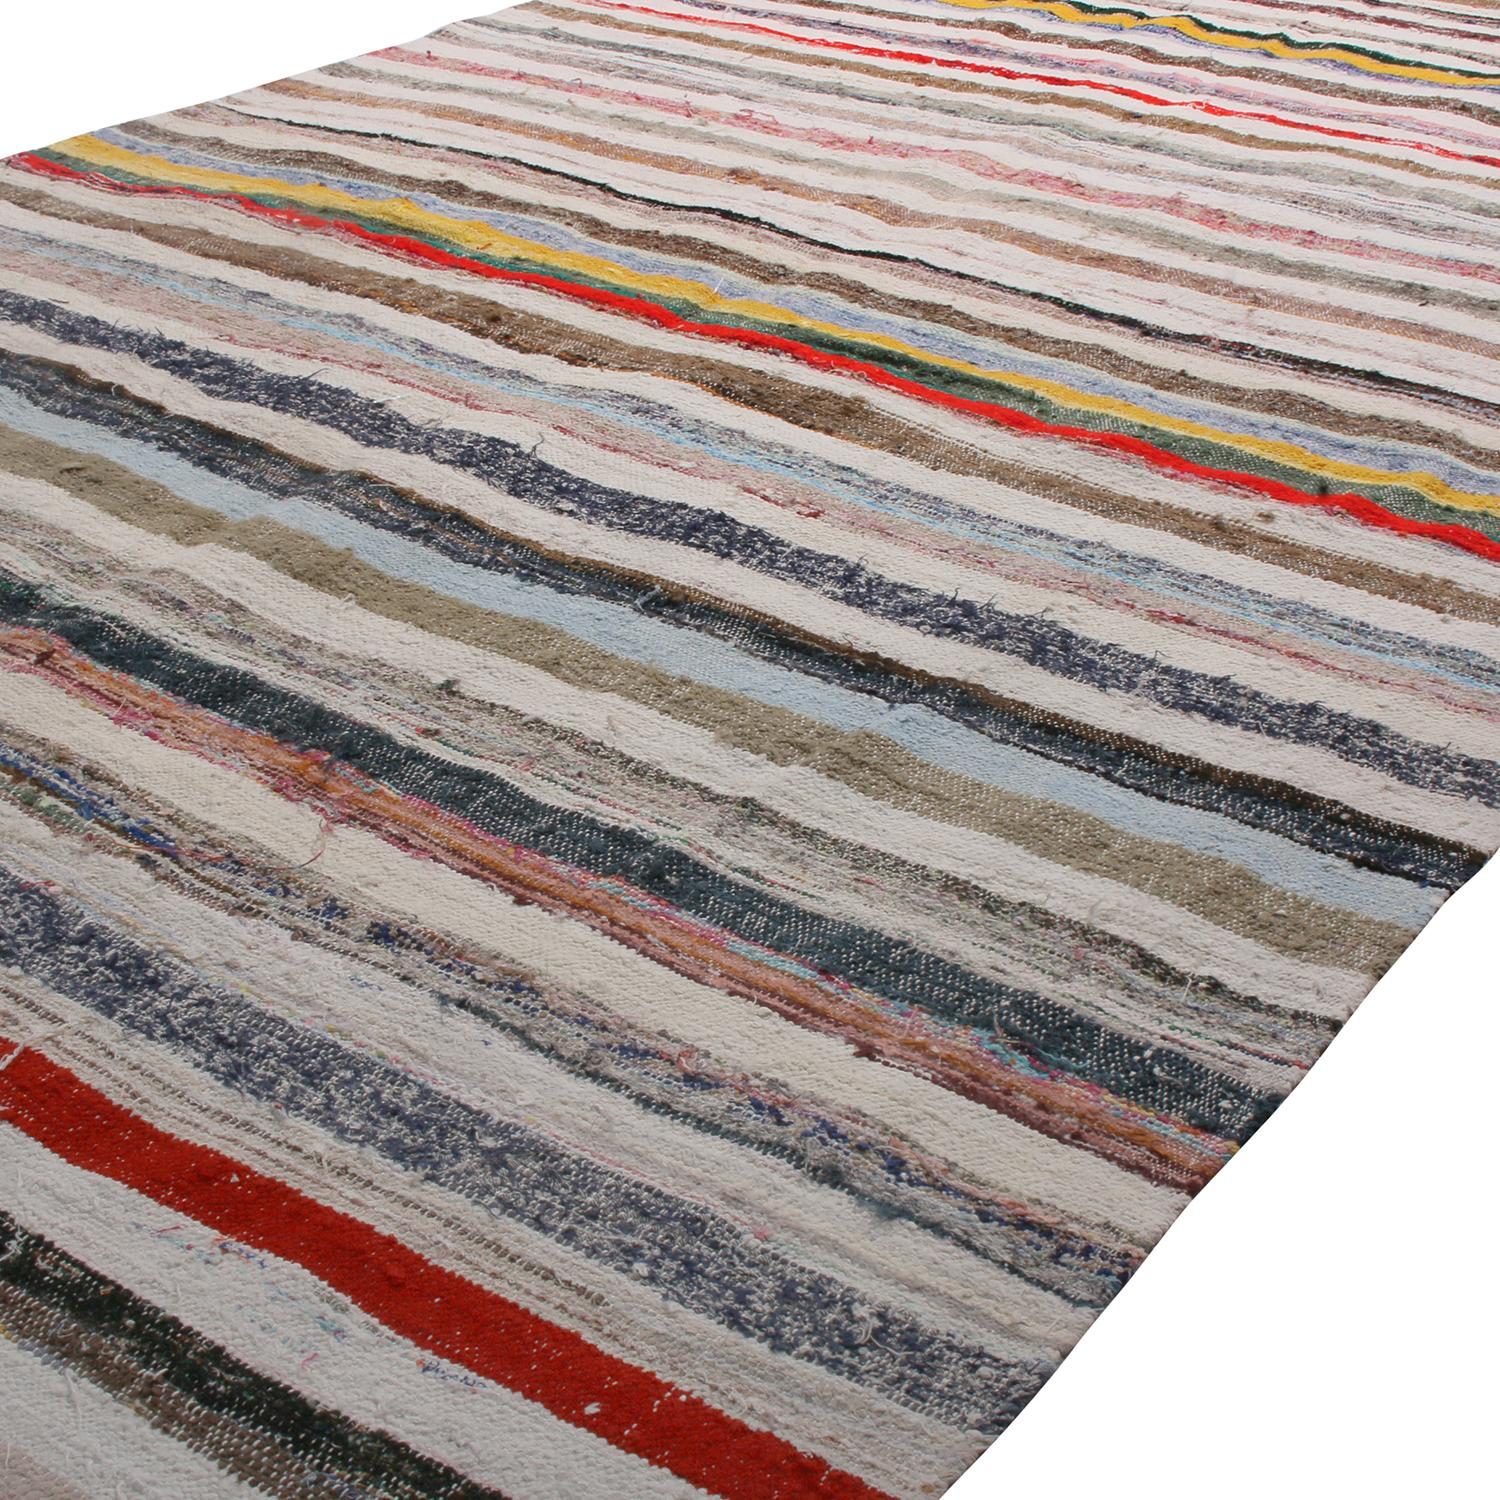 Handwoven in Turkey originating between 1970-1980, this vintage wool kilim rug enjoys a play of subtle, intricate colorway variation and shabby-chic, classic texture complementing the striped pattern. The lively juxtaposition of rich beige brown